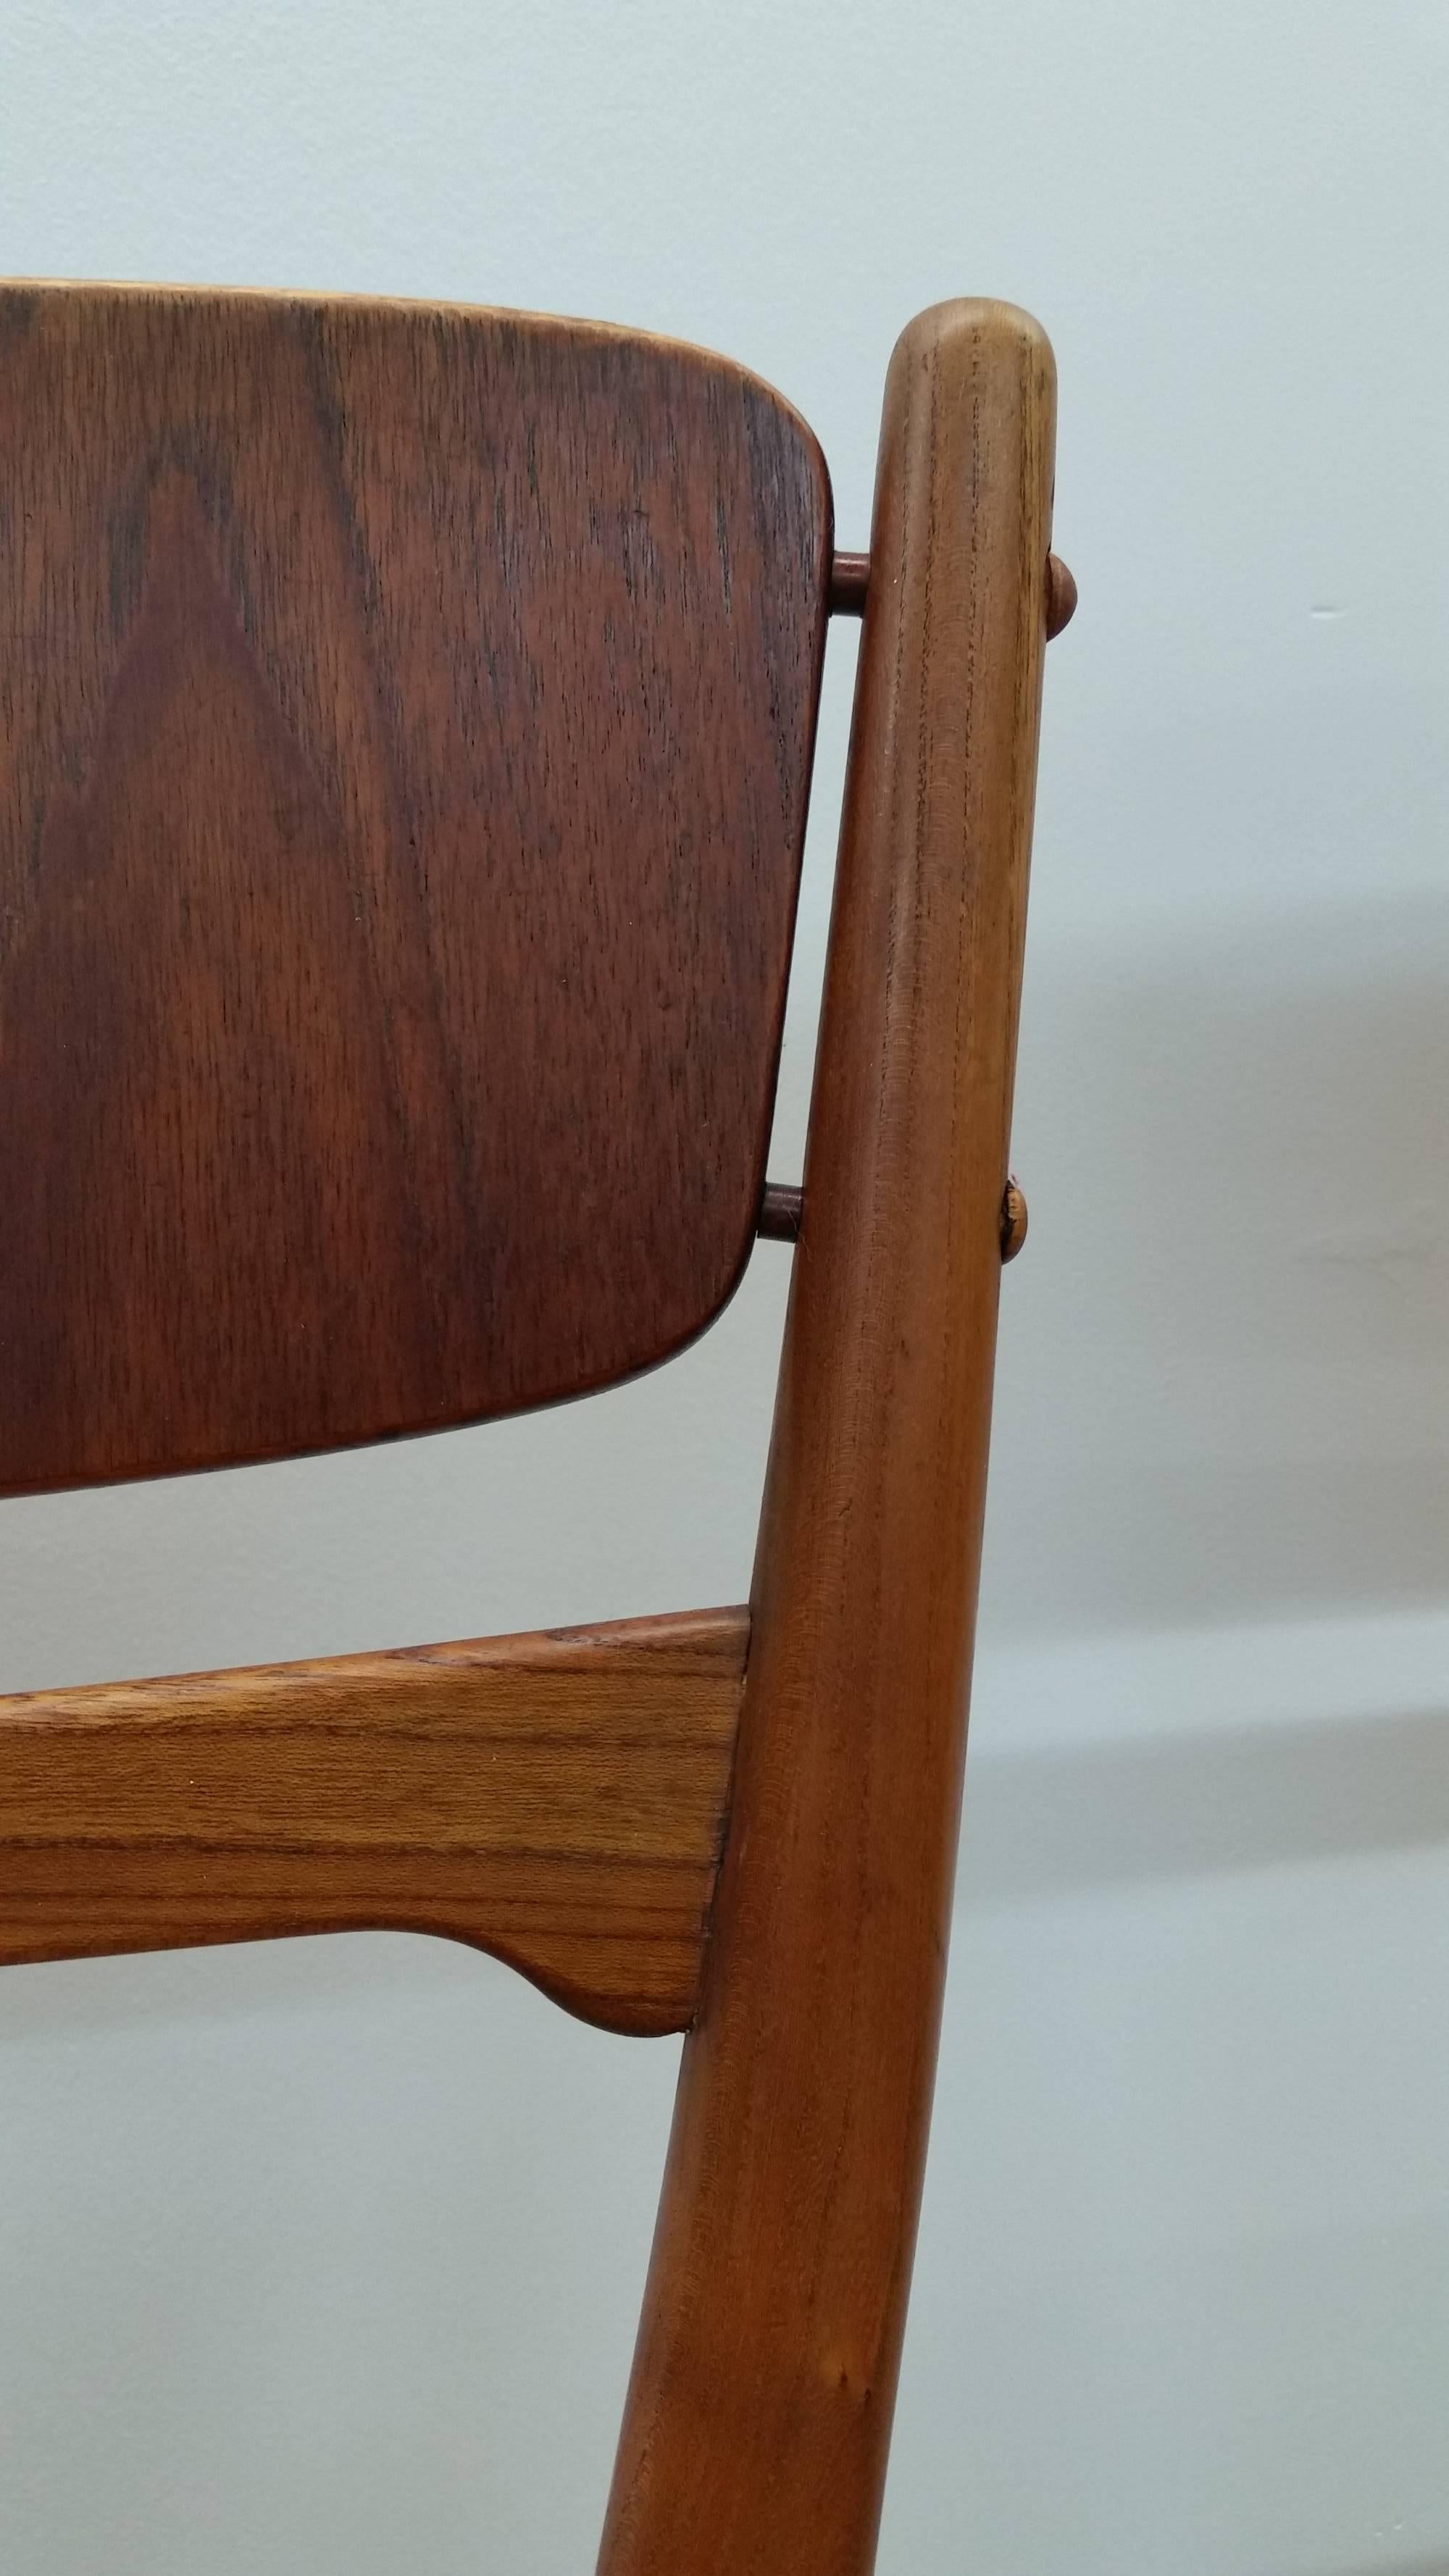 Set of Four Dining Chairs in Walnut and Teak, by Arne Wahl Iversen For Sale 2